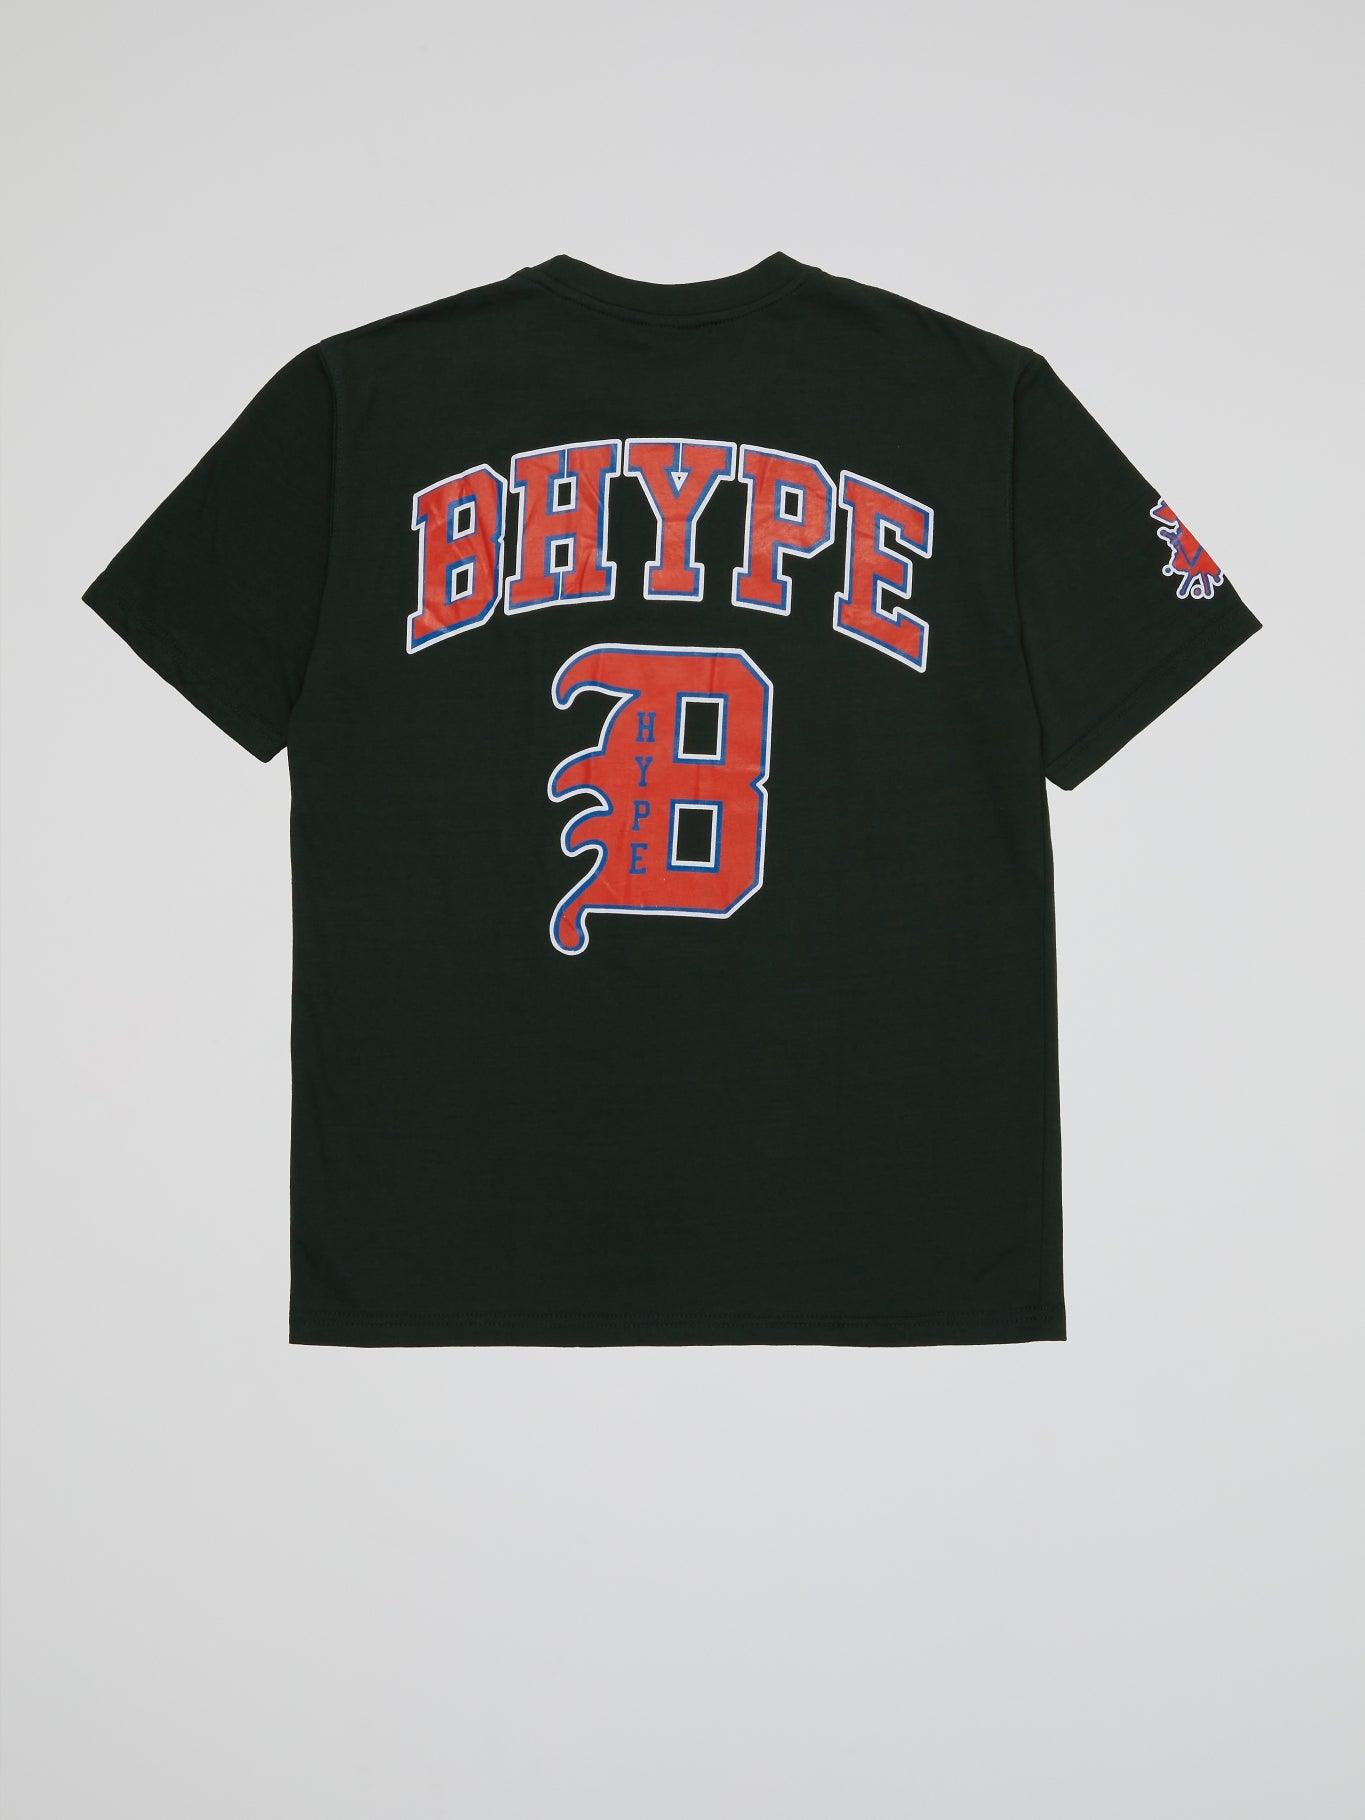 BHYPE VARSITY COLLECTION T-SHIRT GREEN - B-Hype Society